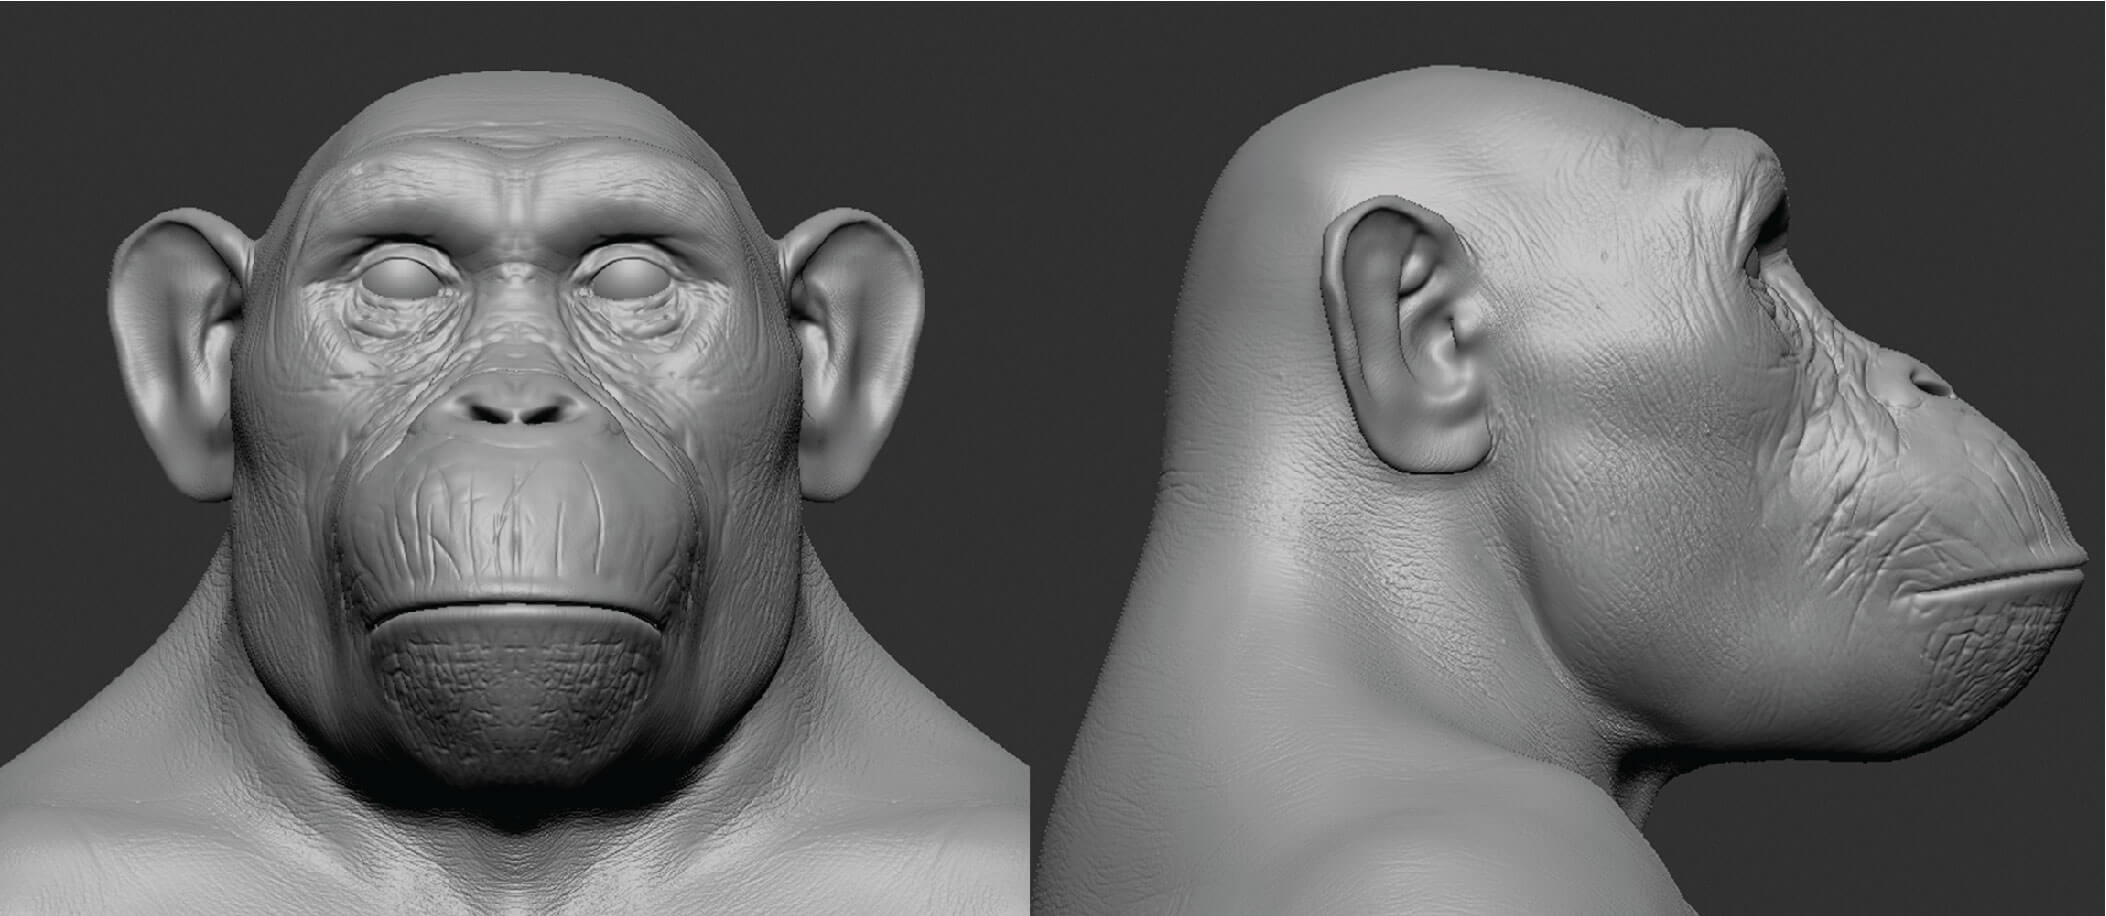 Front and lateral views of sculpted chimpanzee Head in Zbrush